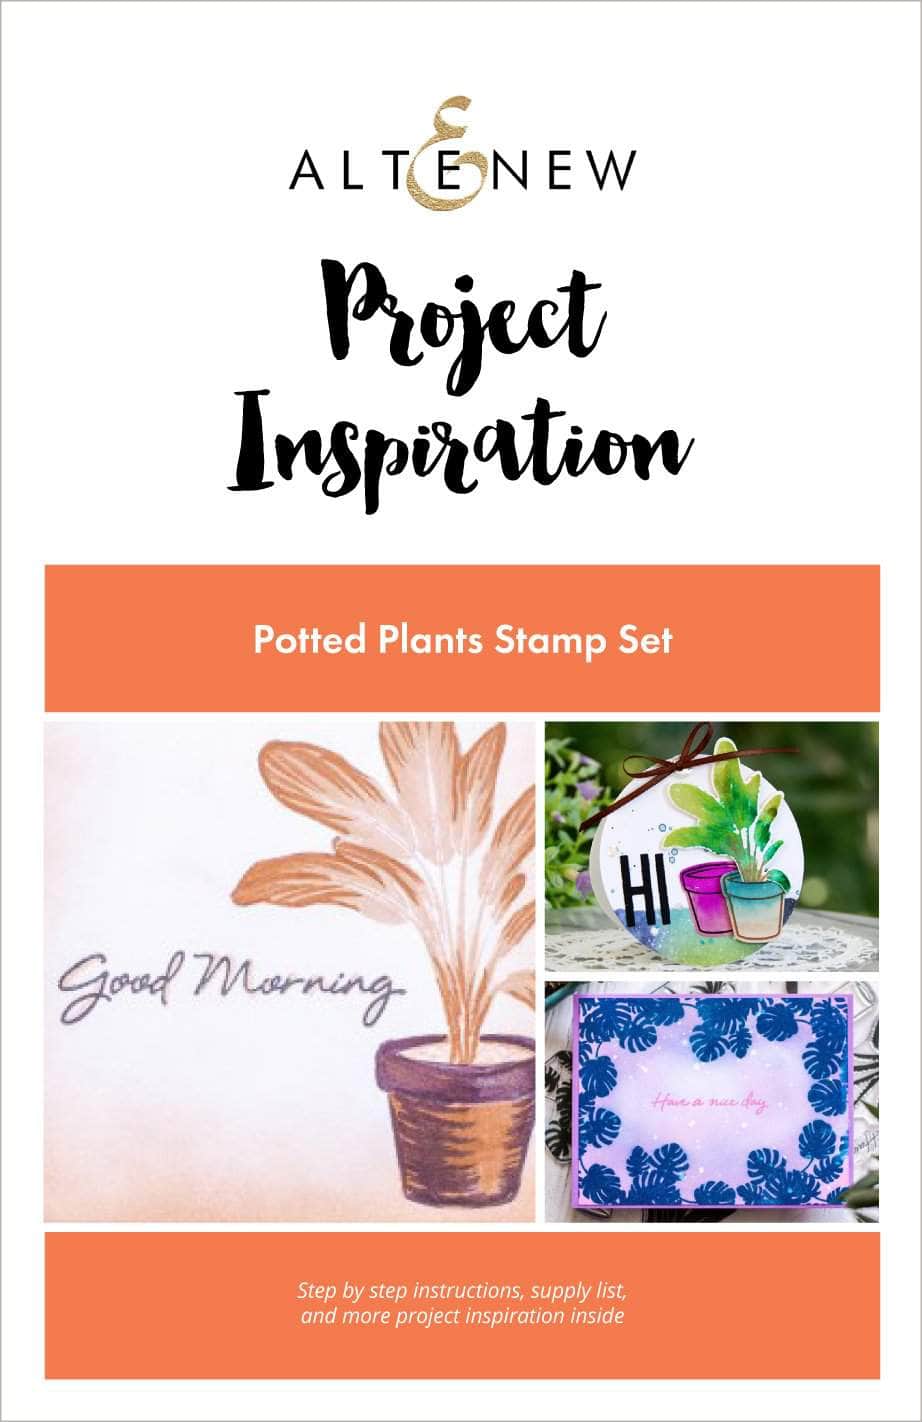 Printed Media Potted Plants Project Inspiration Guide